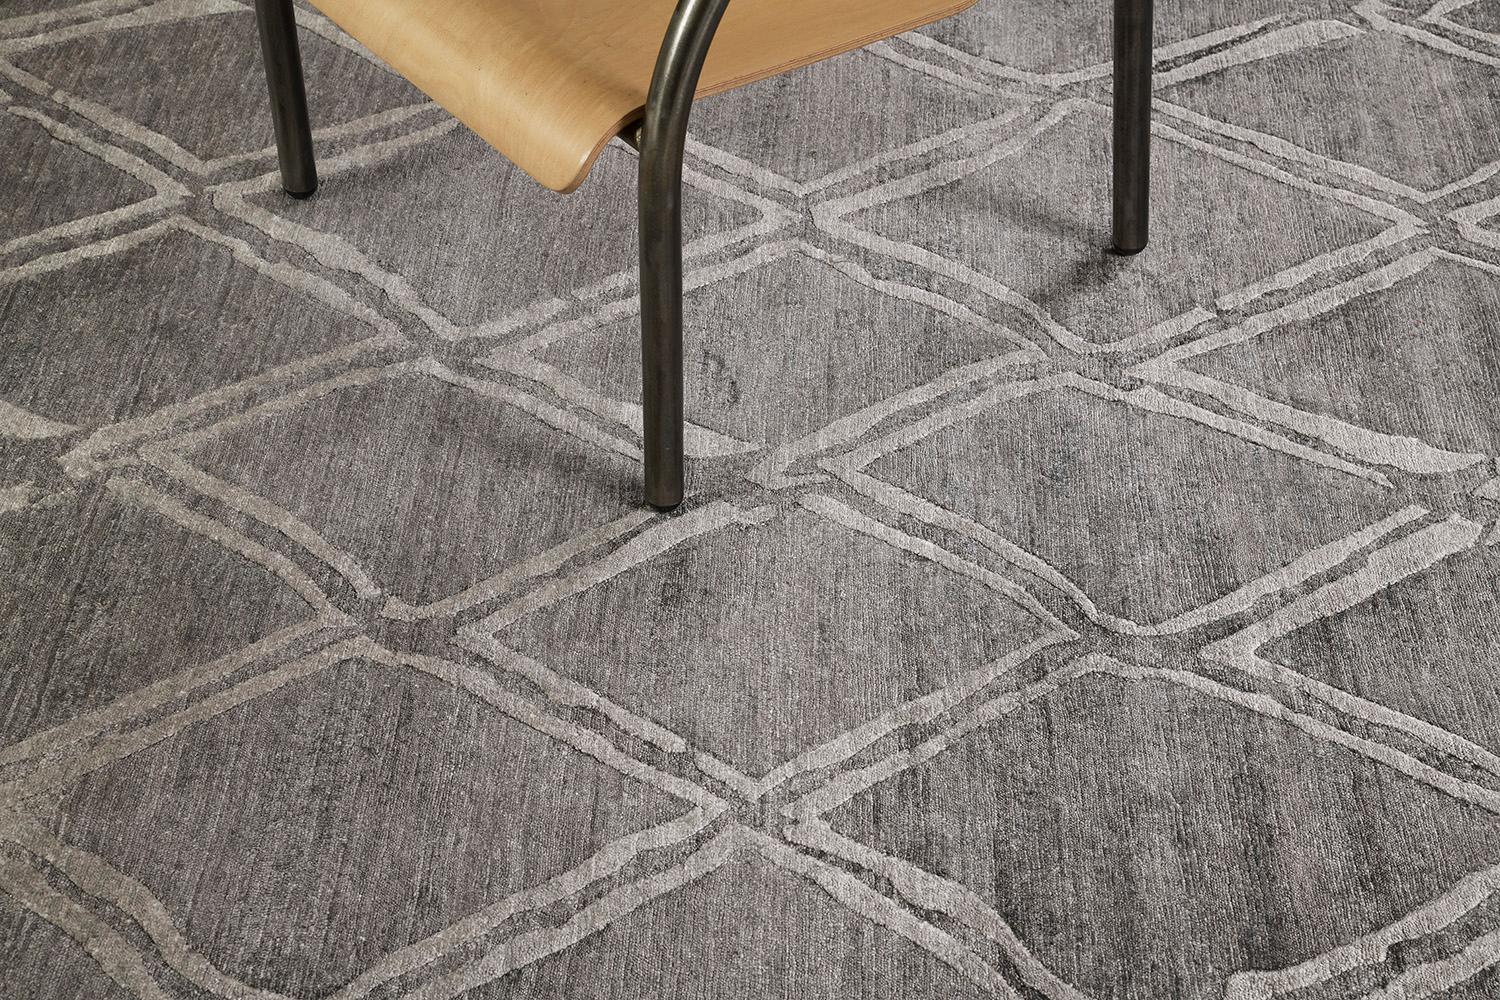 Palisade' is the perfect bamboo silk rug in charcoal gray. The rug's sheen and embossed line work create a diamond lattice pattern that gives the rug an effortlessly chic and luxurious look. Palisade's lustrous silks bring movement to the rug